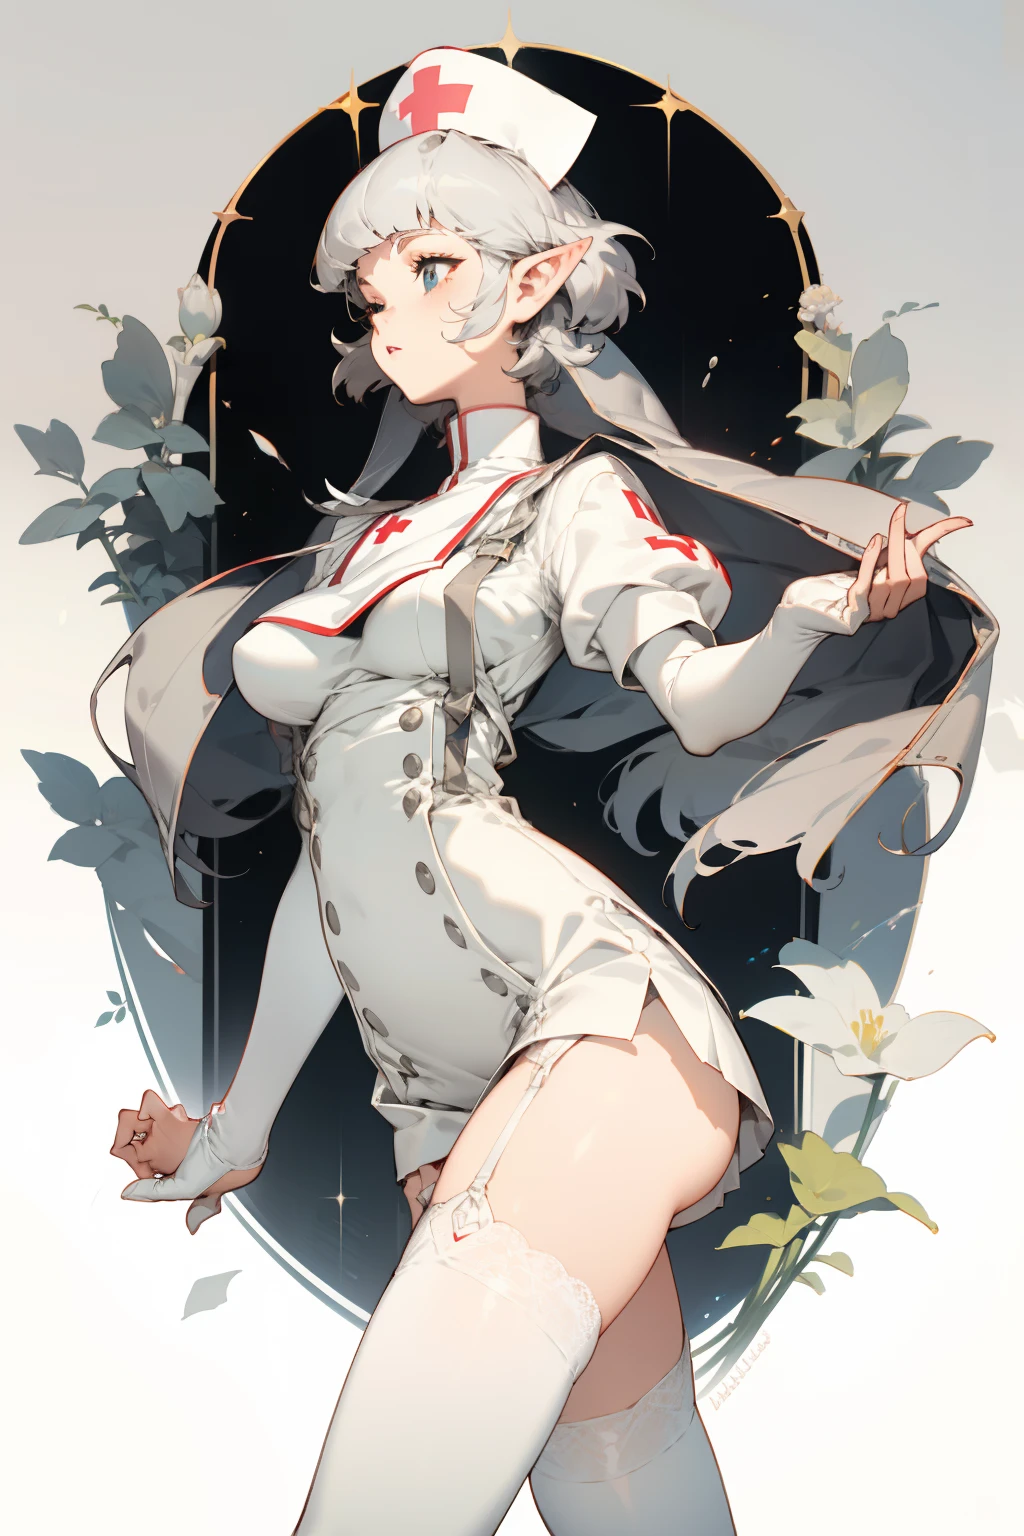 pointy ears，Bigboobs，Two legs（Princess cut hairstyle），short detailed hair，Sideburns have long hair，upper legs，white nurse outfit，White nurse's uniform，White knee-length stockings，Lace suspenders